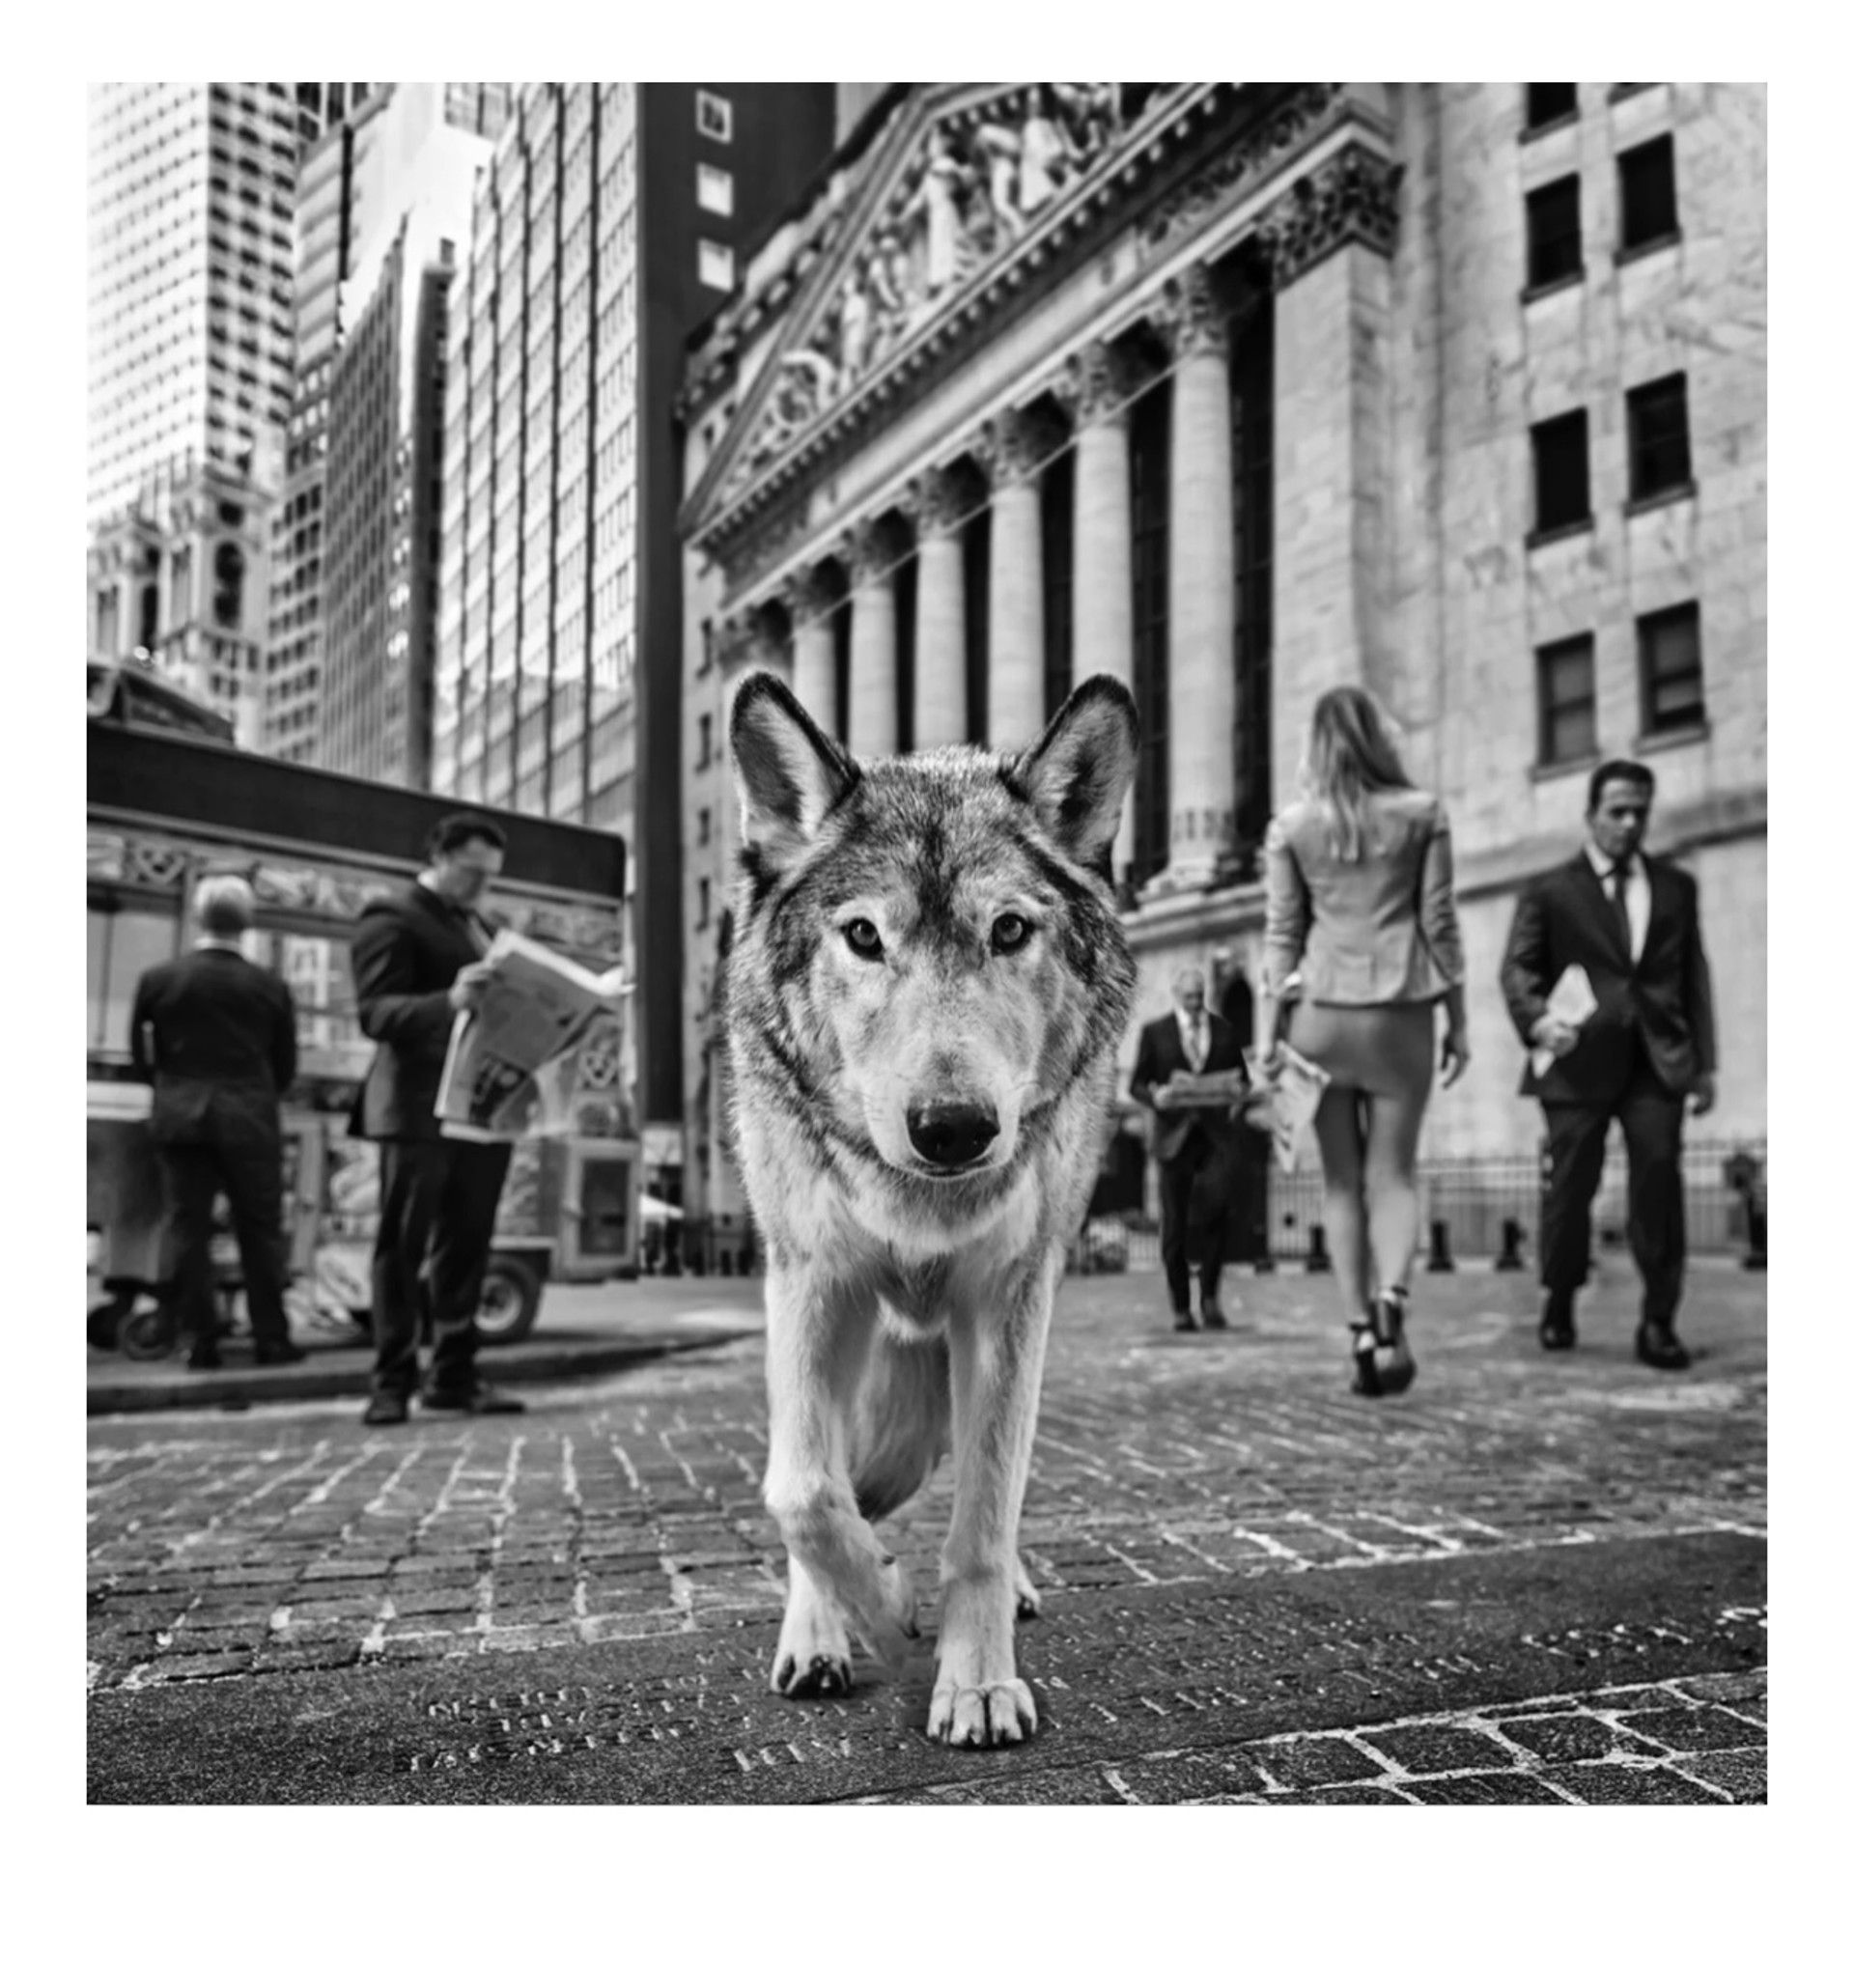 Once Upon A Time on Wallstreet by DAVID YARROW